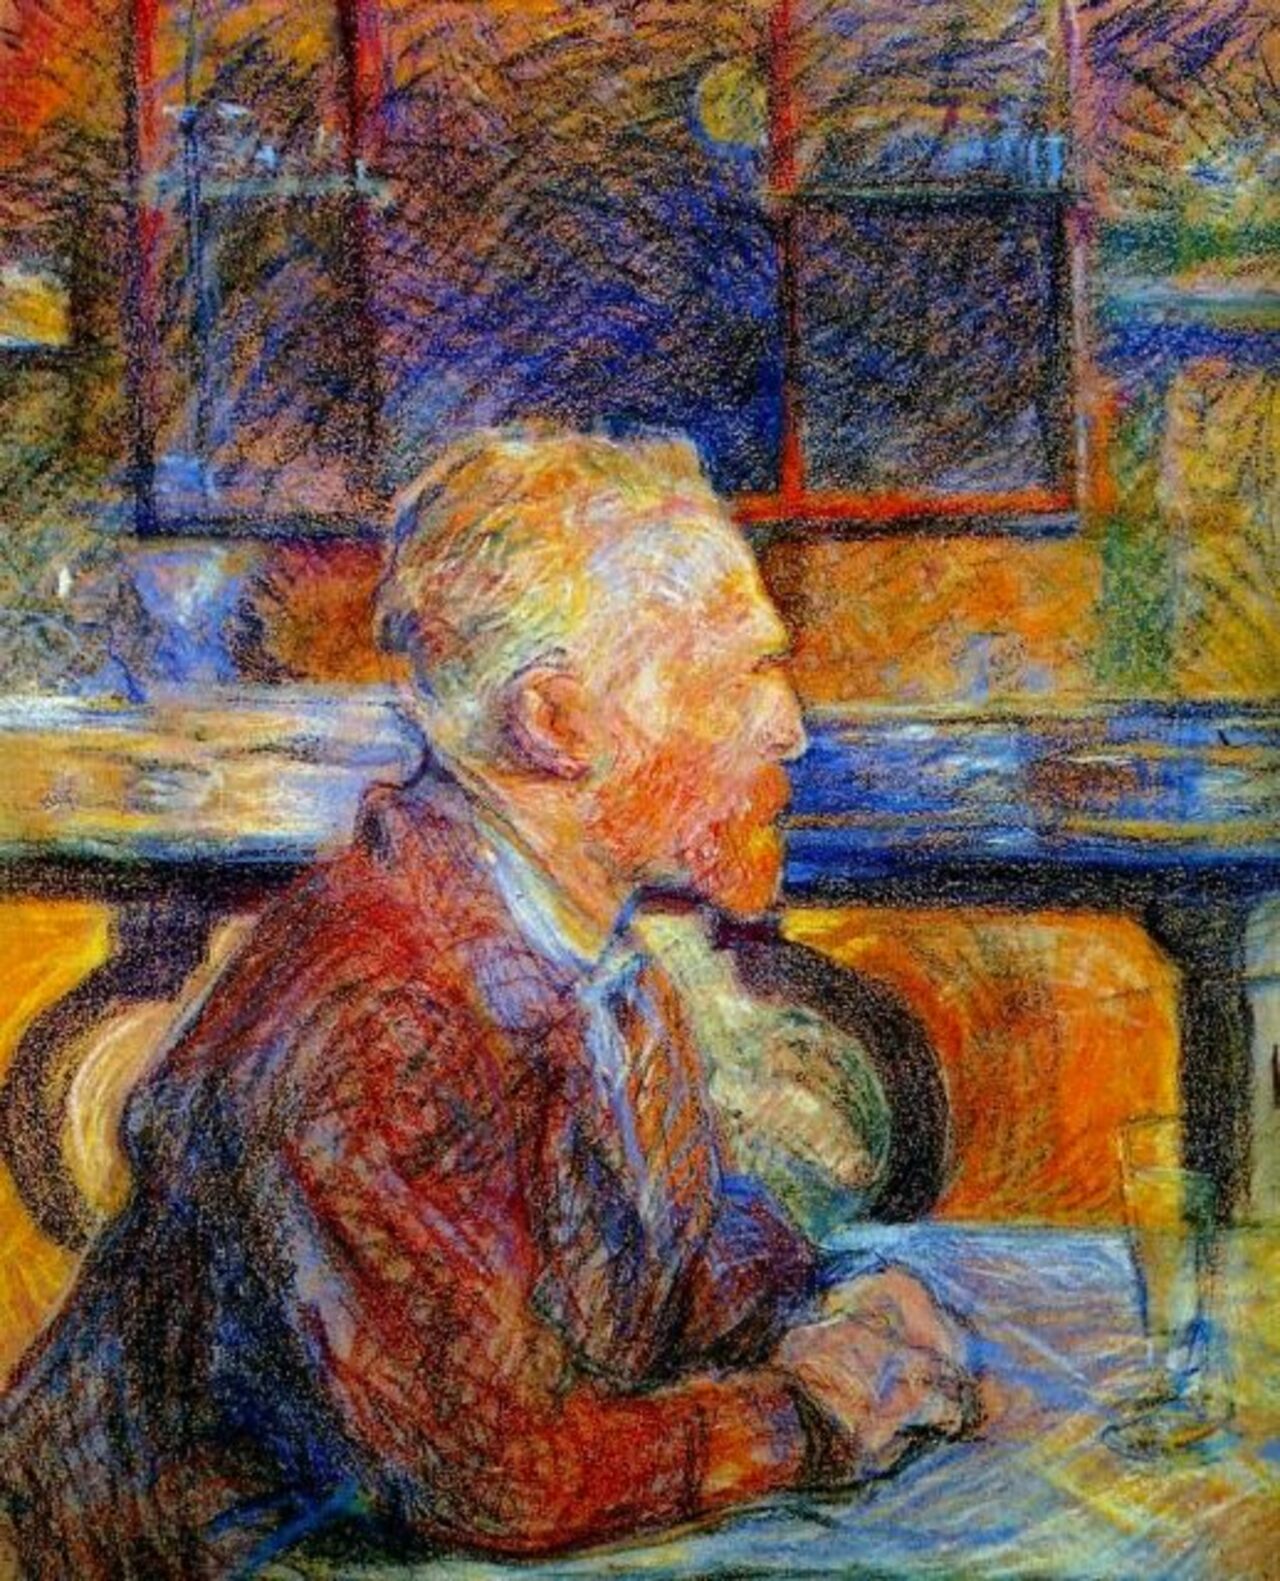 Toulouse-Lautrec - "Portrait of Vincent" 1887.  The two geniuses painted together and exhibited together #art https://t.co/oBkuZYwACU